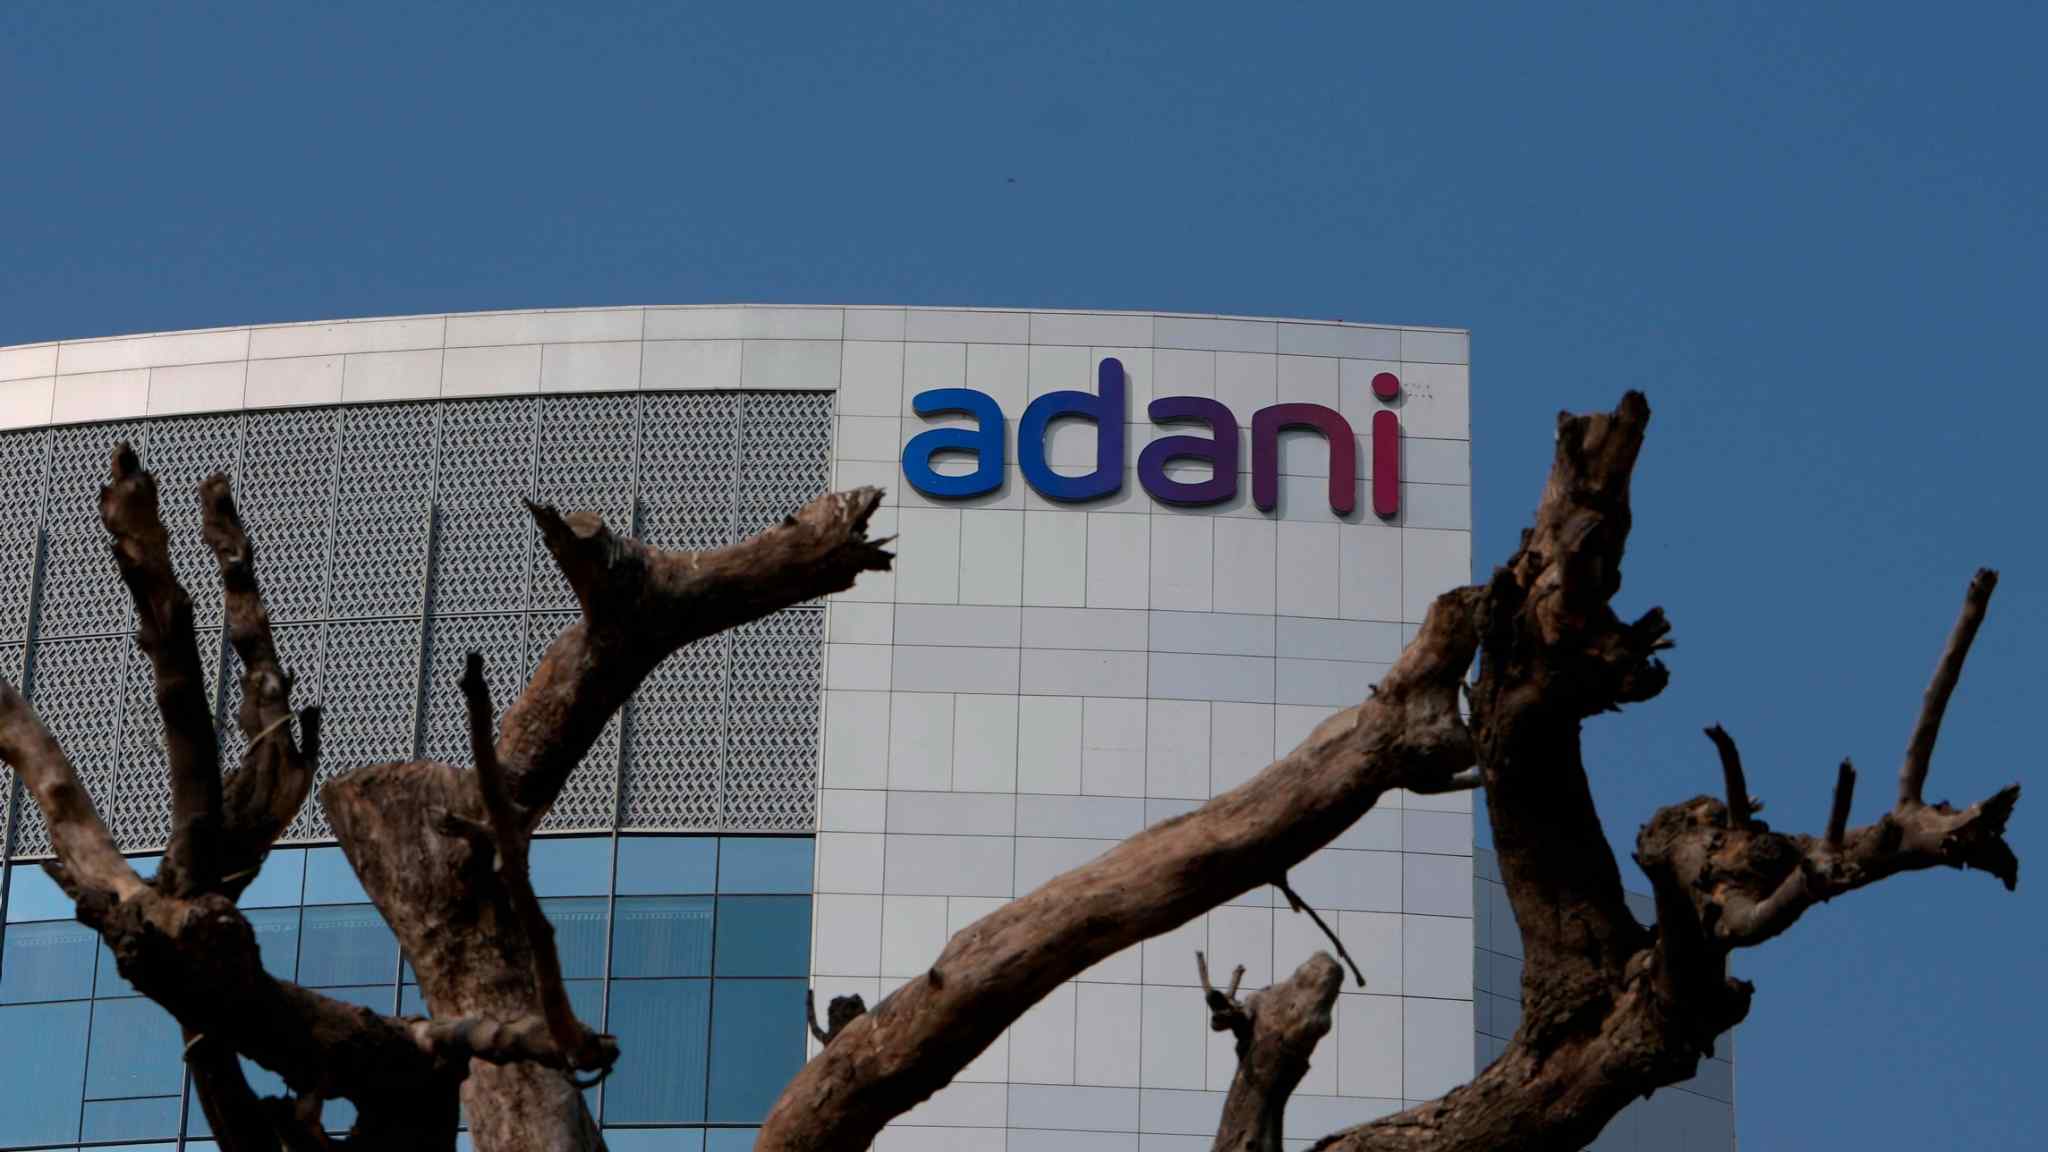 Live news: Norway’s $1.3tn oil fund cut stakes in Adani companies, says chief executive